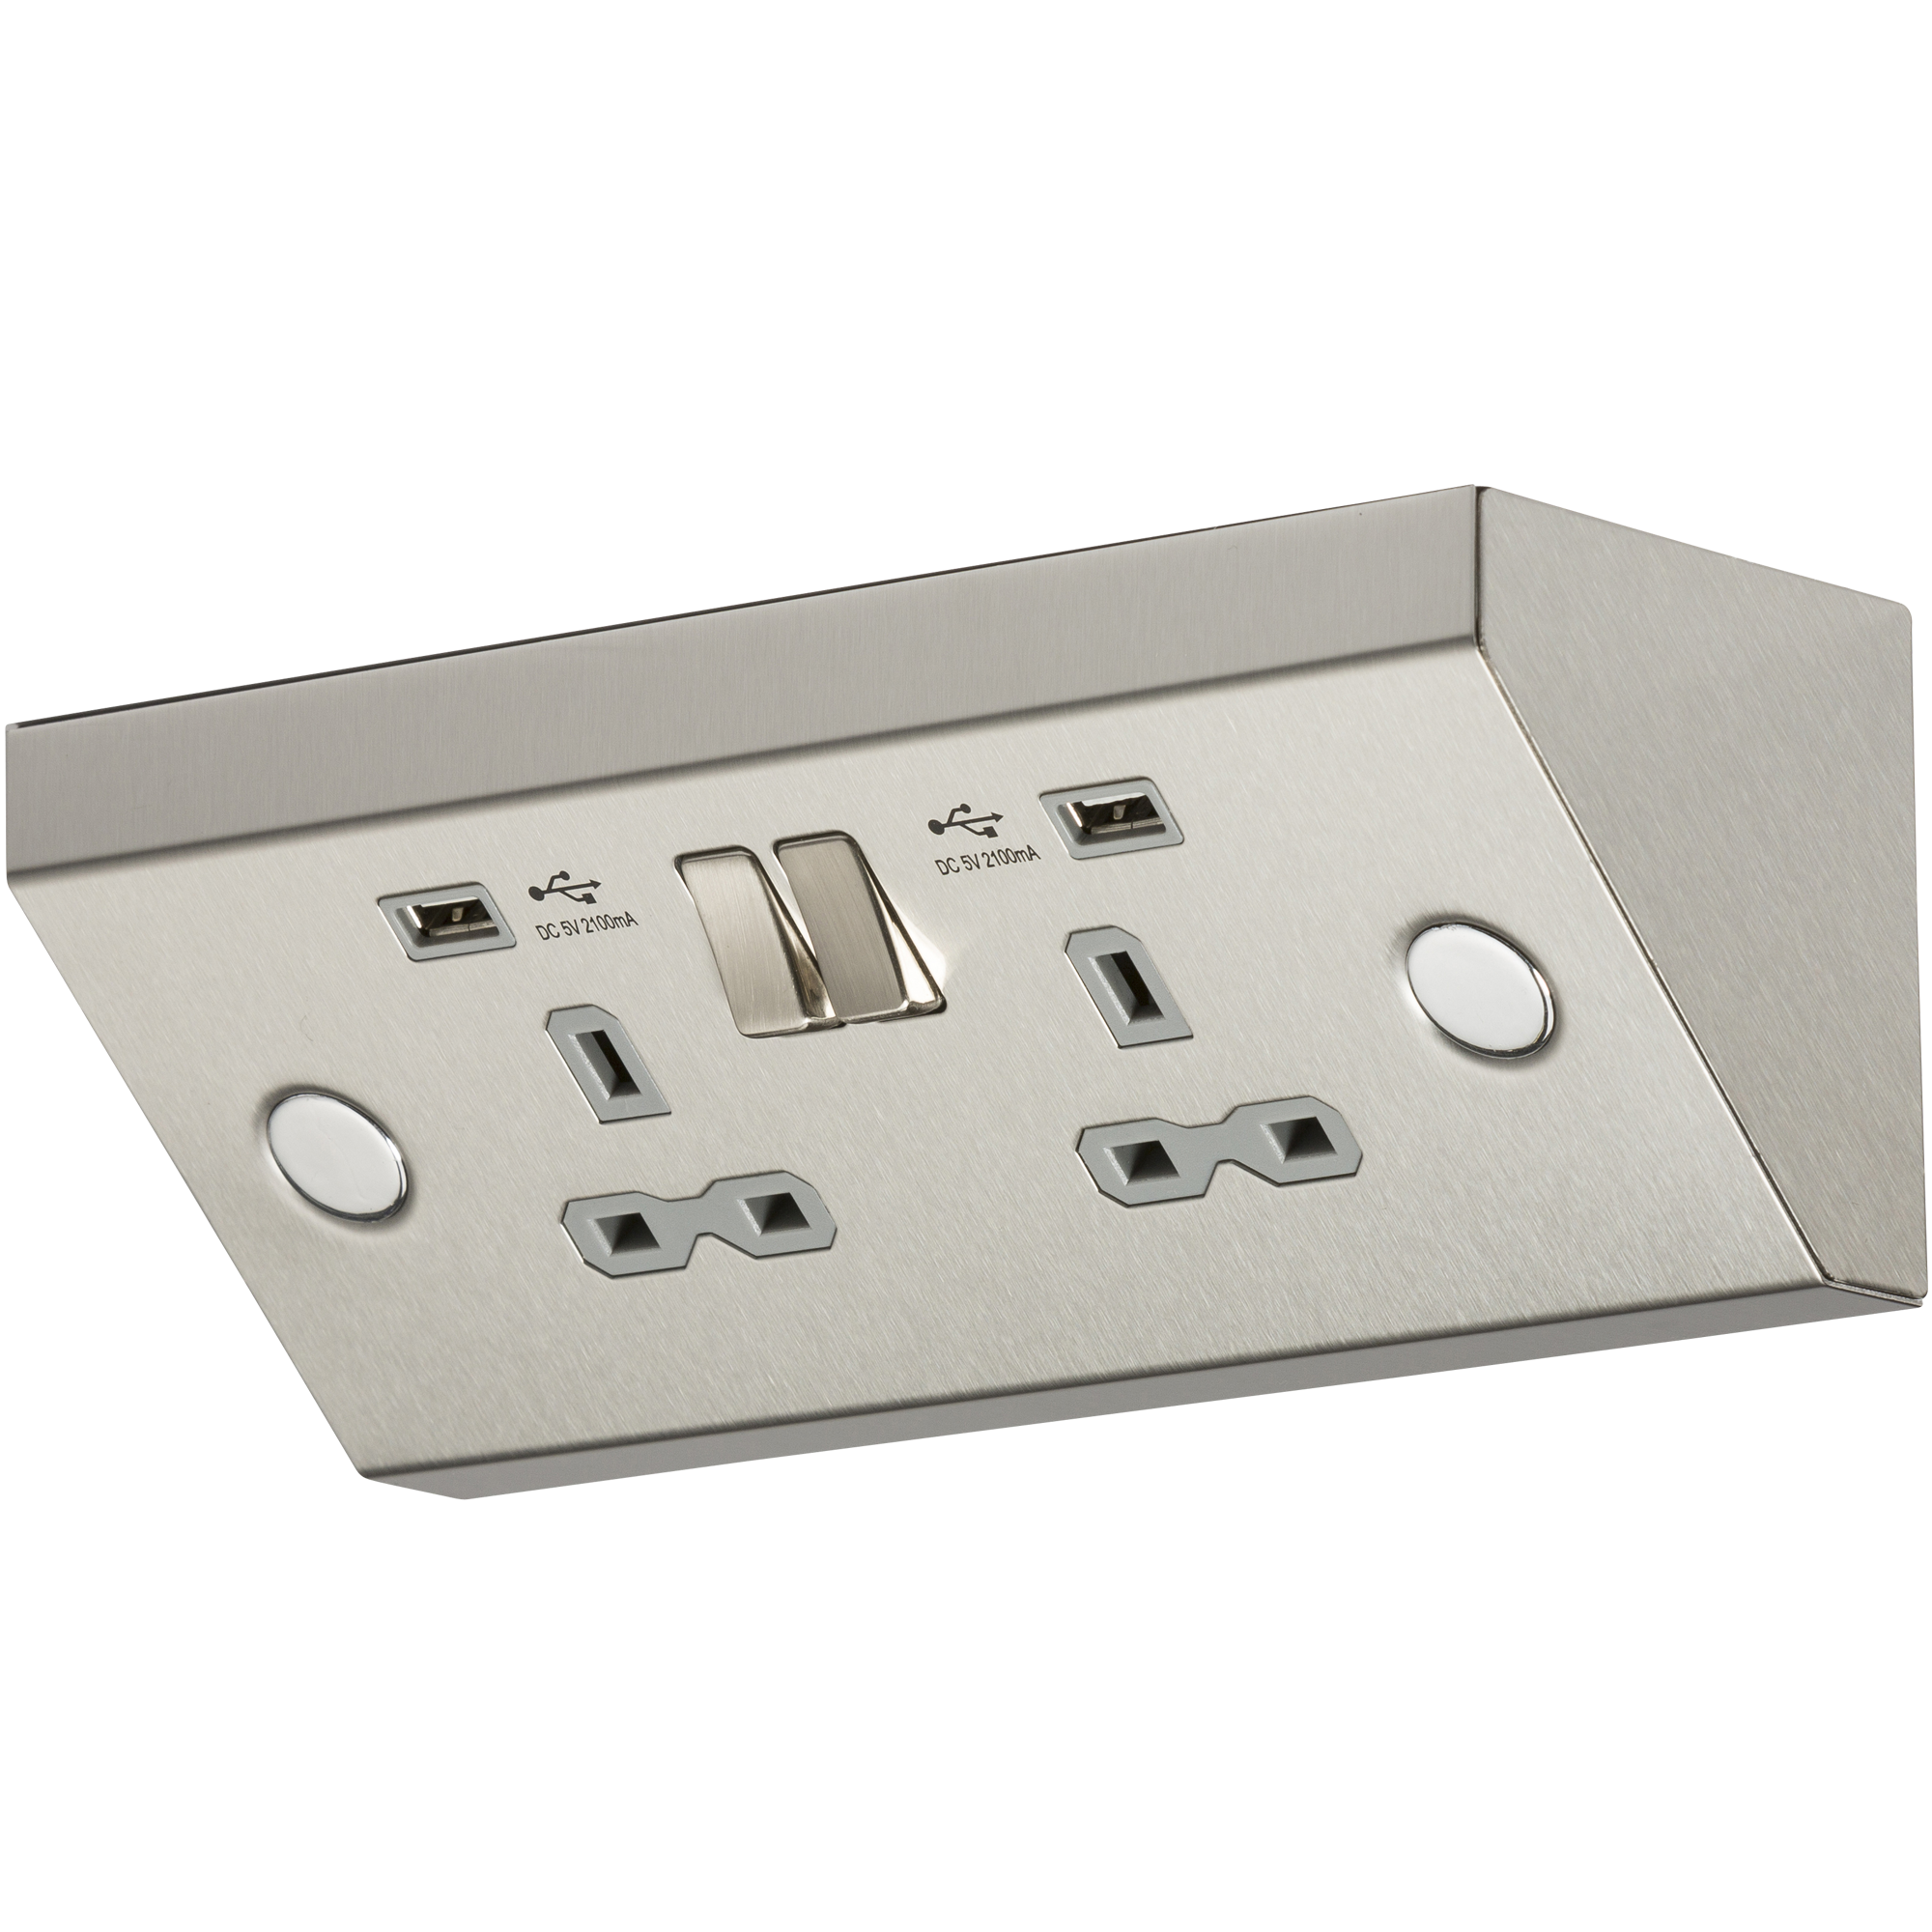 13A 2G Mounting Switched Socket With Dual USB Charger (2.1A) - Stainless Steel With Grey Insert - SKR009 